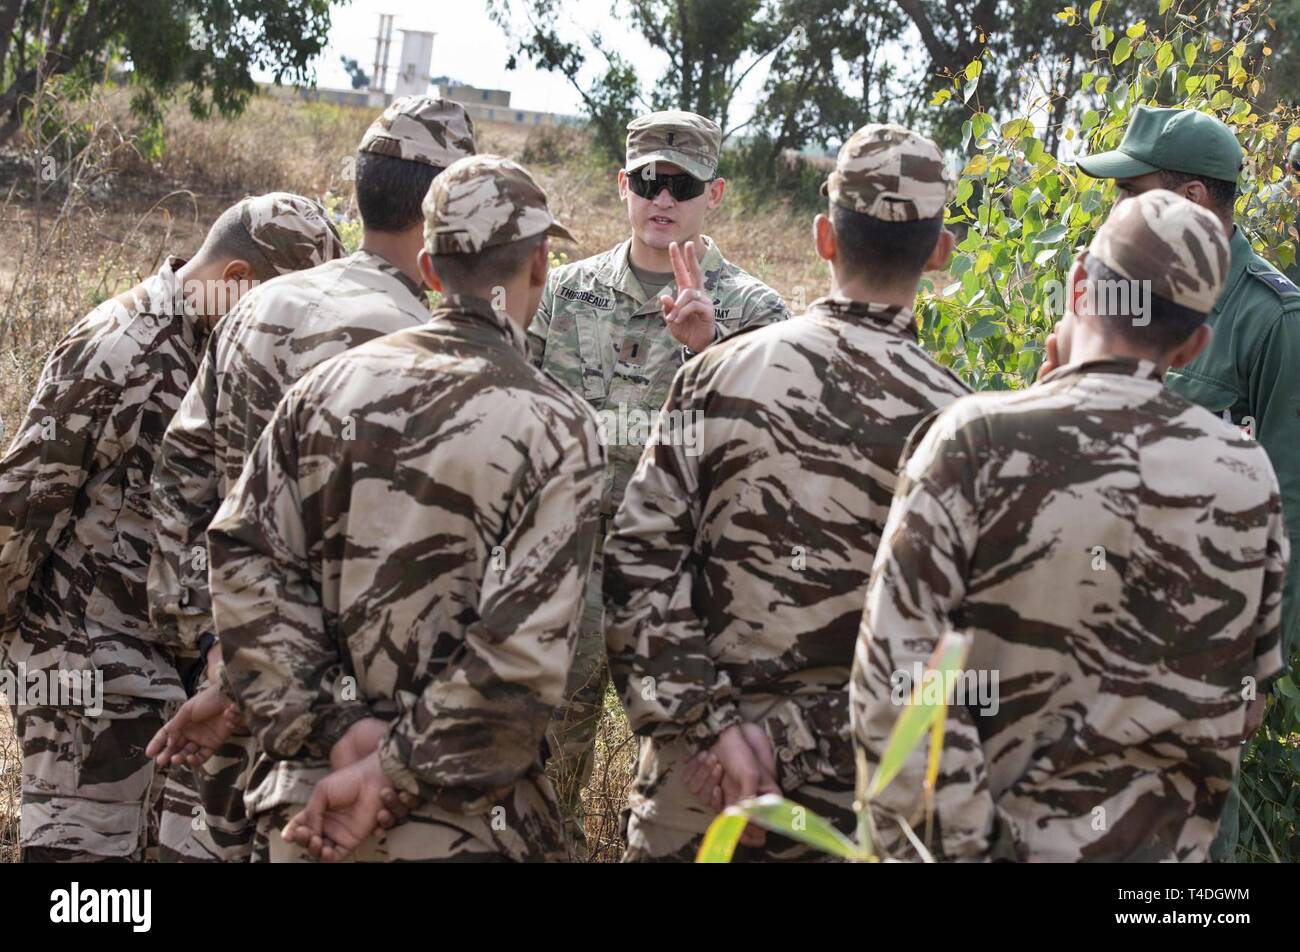 U.S. Army 1st Lt. Henry Thibodeaux with 1st Squadron, 75th Cavalry Regiment, 2nd Brigade Combat Team, 101st Airborne Division, reviews reconnaissance techniques with Moroccan special operations forces’ 2nd Airborne Brigade members during the field training exercise portion of exercise African Lion 2019 in Tifnit, Morocco, March 26, 2019. African Lion 2019 is an annual, combined multilateral exercise designed to improve interoperability and mutual understanding of each nations’ tactics, techniques and procedures while demonstrating the strong bond between the nations’ militaries. Stock Photo